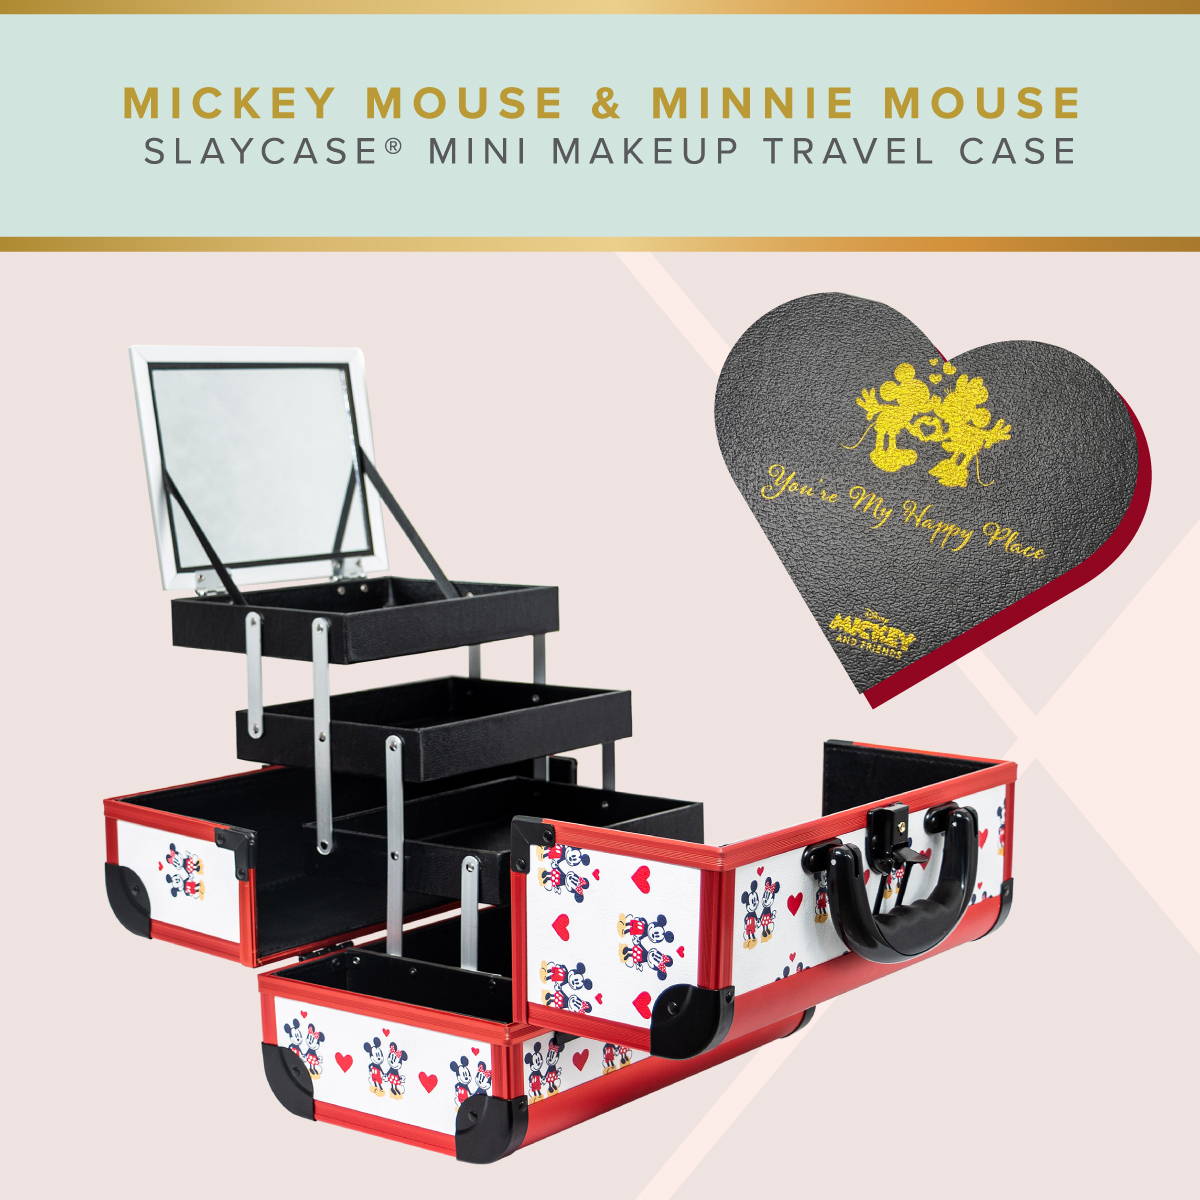 mickey mouse & minnie mouse slaycase mini makeup travel case